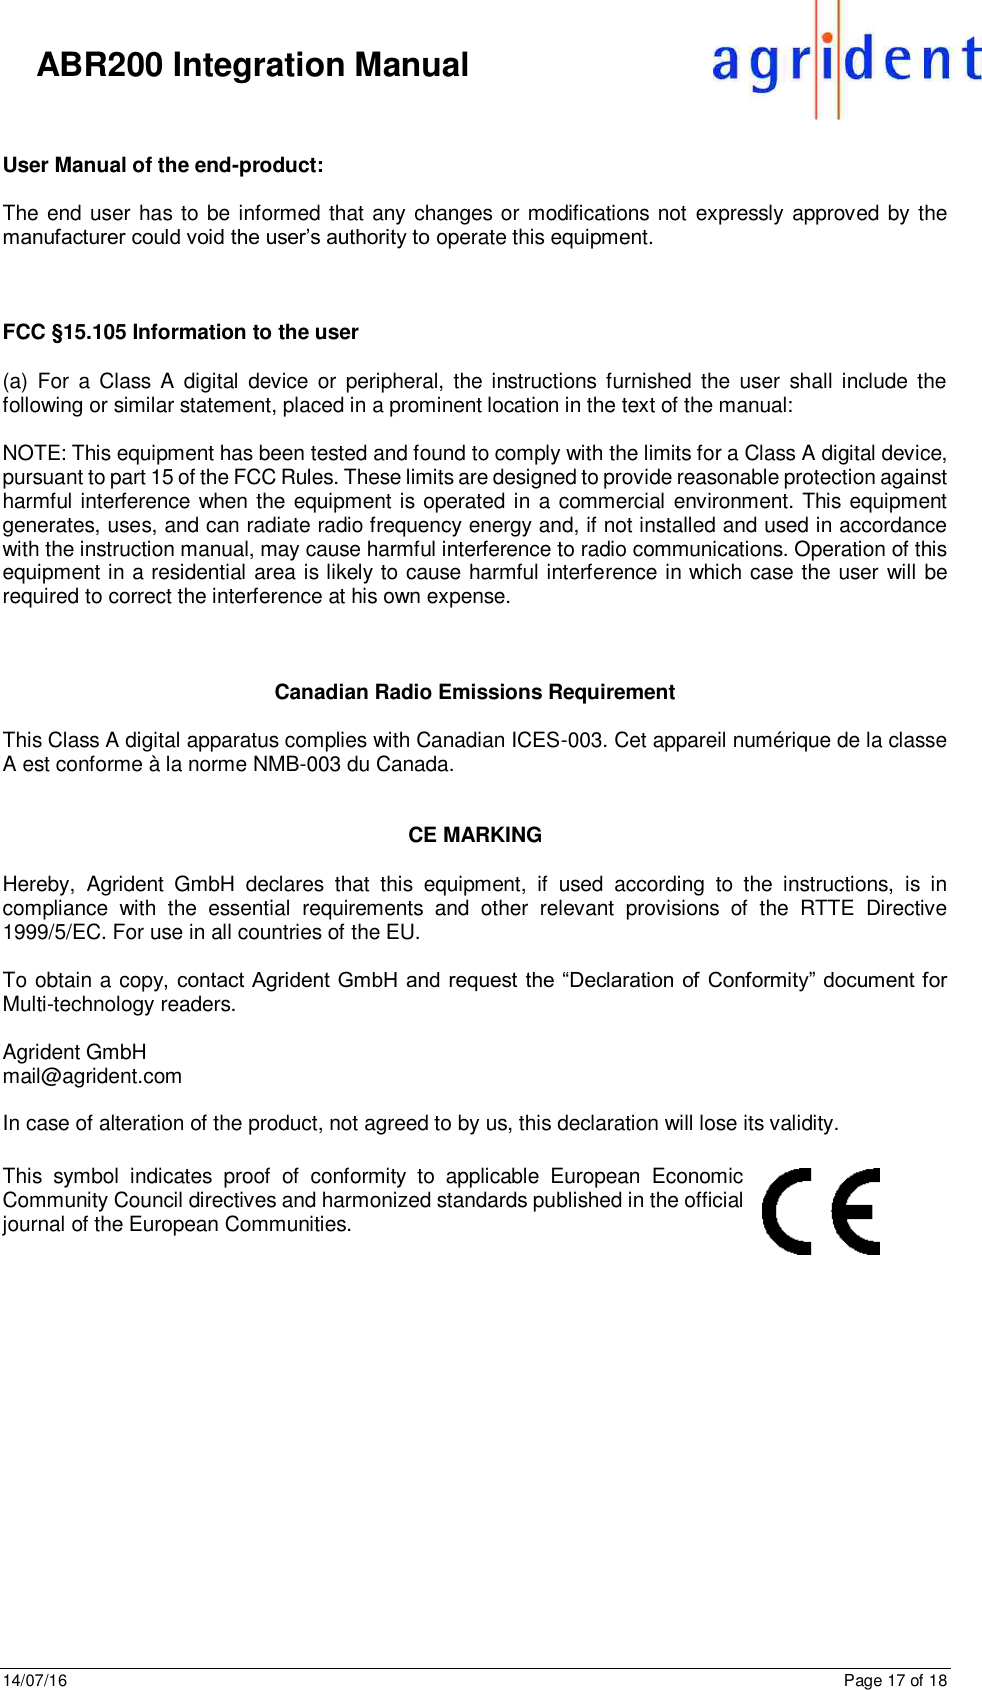 14/07/16      Page 17 of 18      ABR200 Integration Manual  User Manual of the end-product:  The end user has to be informed that any changes or modifications not expressly approved by the manufacturer could void the user’s authority to operate this equipment.    FCC §15.105 Information to the user  (a)  For  a  Class  A  digital  device  or  peripheral,  the instructions furnished  the  user  shall include  the following or similar statement, placed in a prominent location in the text of the manual:   NOTE: This equipment has been tested and found to comply with the limits for a Class A digital device, pursuant to part 15 of the FCC Rules. These limits are designed to provide reasonable protection against harmful interference when the equipment is operated in a commercial environment. This equipment generates, uses, and can radiate radio frequency energy and, if not installed and used in accordance with the instruction manual, may cause harmful interference to radio communications. Operation of this equipment in a residential area is likely to cause harmful interference in which case the user will be required to correct the interference at his own expense.     Canadian Radio Emissions Requirement  This Class A digital apparatus complies with Canadian ICES-003. Cet appareil numérique de la classe A est conforme à la norme NMB-003 du Canada.   CE MARKING  Hereby,  Agrident  GmbH  declares  that  this  equipment,  if  used  according  to  the  instructions,  is  in compliance  with  the  essential  requirements  and  other  relevant  provisions  of  the  RTTE  Directive 1999/5/EC. For use in all countries of the EU.   To obtain a copy, contact Agrident GmbH and request  the “Declaration of Conformity” document for Multi-technology readers.  Agrident GmbH  mail@agrident.com  In case of alteration of the product, not agreed to by us, this declaration will lose its validity.  This  symbol  indicates  proof  of  conformity  to  applicable  European  Economic Community Council directives and harmonized standards published in the official journal of the European Communities.   